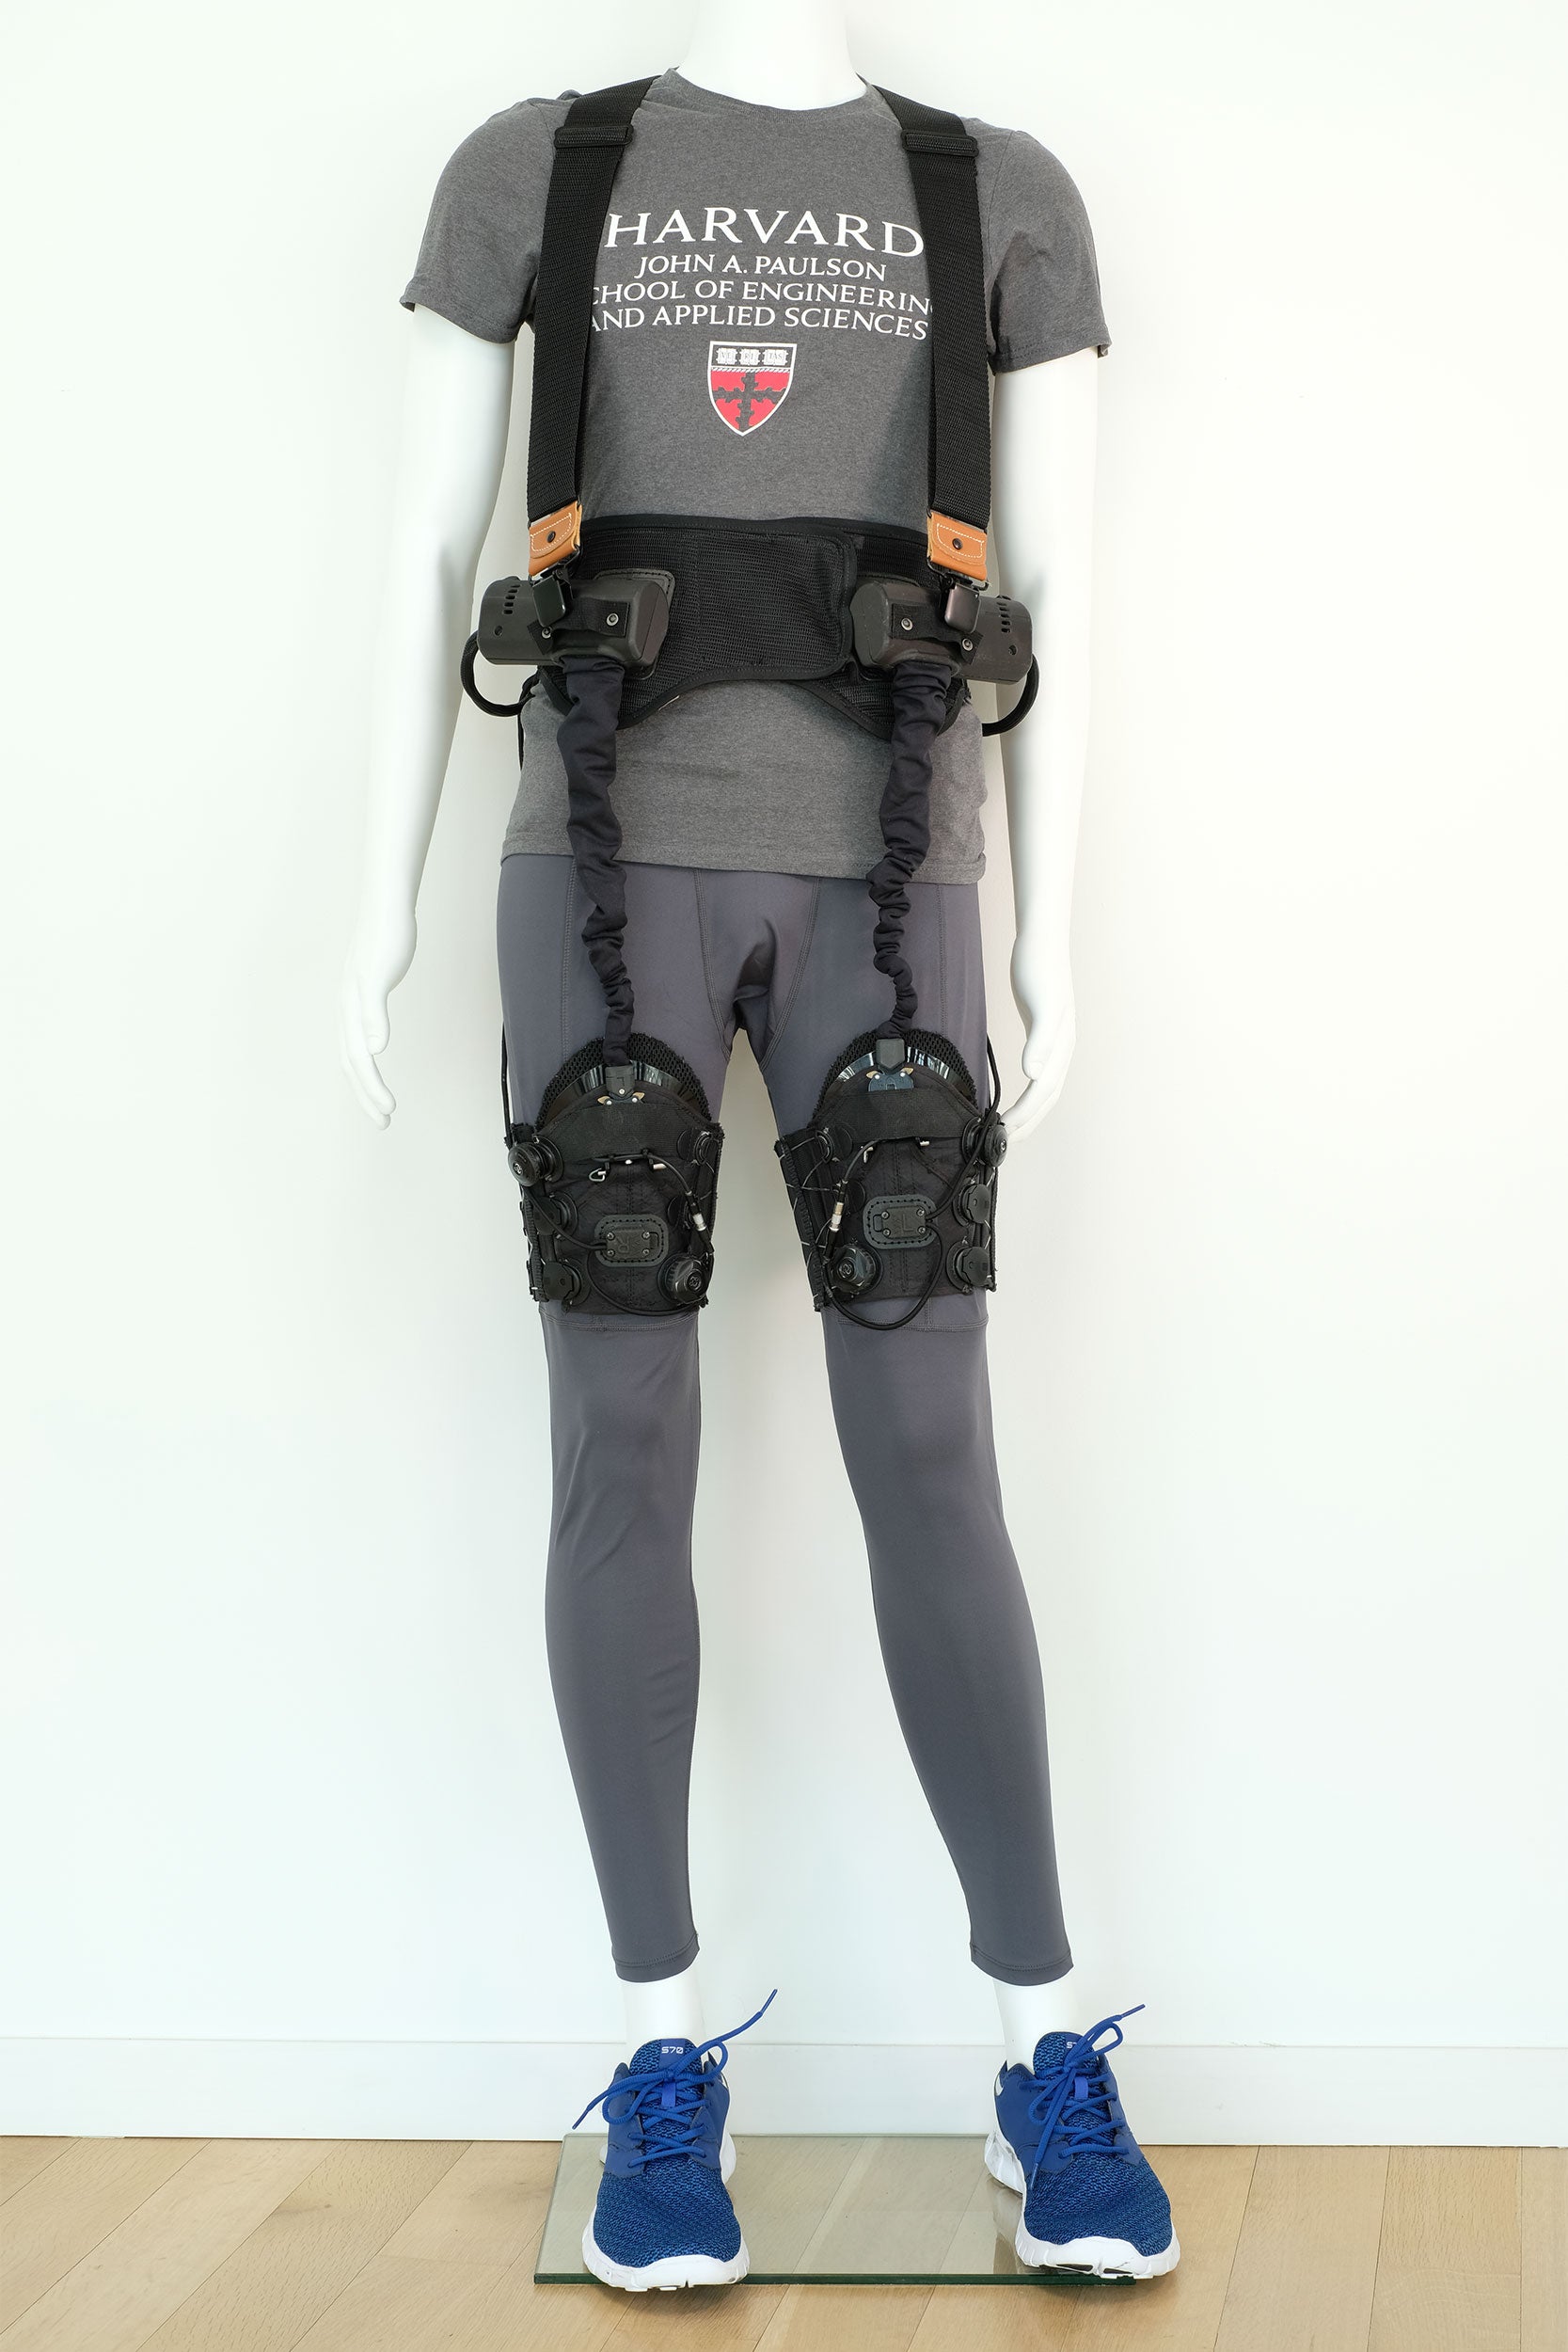 Soft robotic exosuit worn around the hips and thighs.